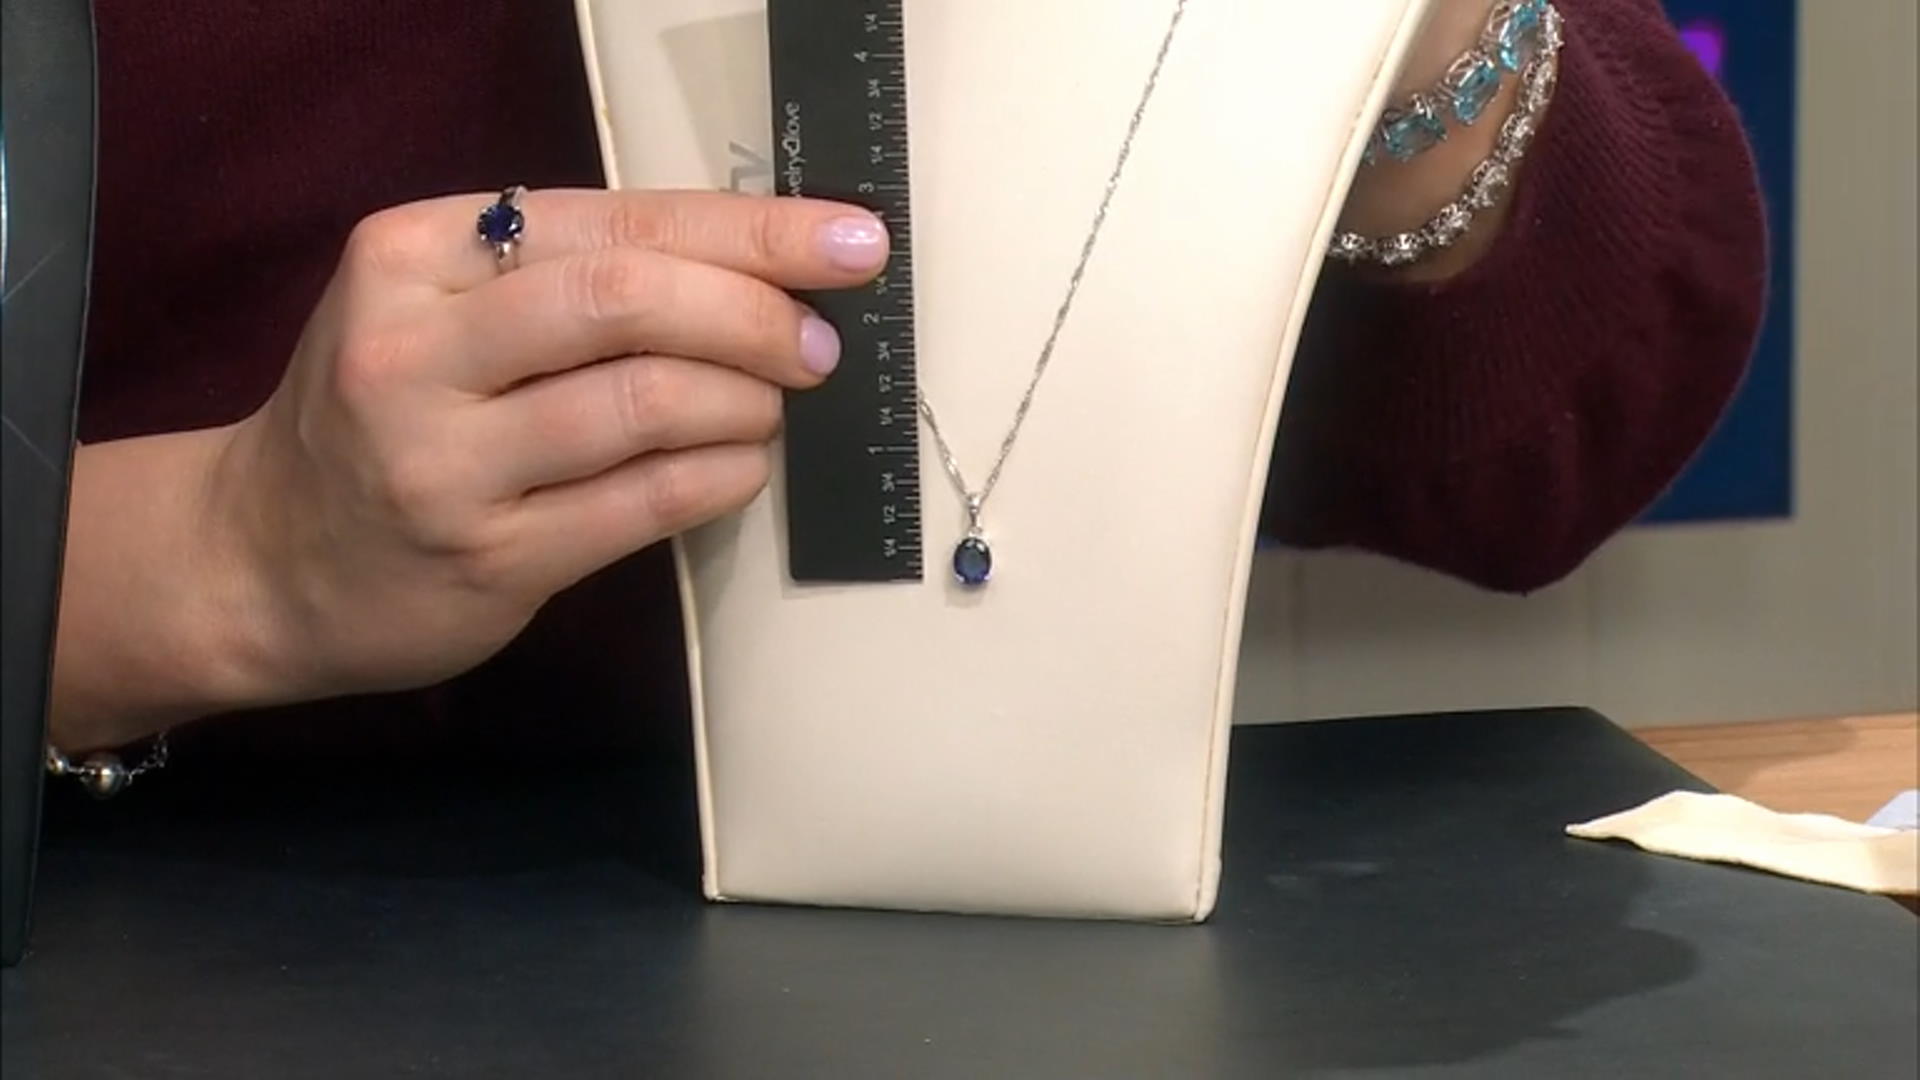 Blue Iolite Rhodium Over Sterling Silver Solitaire Pendant With Chain 1.21ct Video Thumbnail